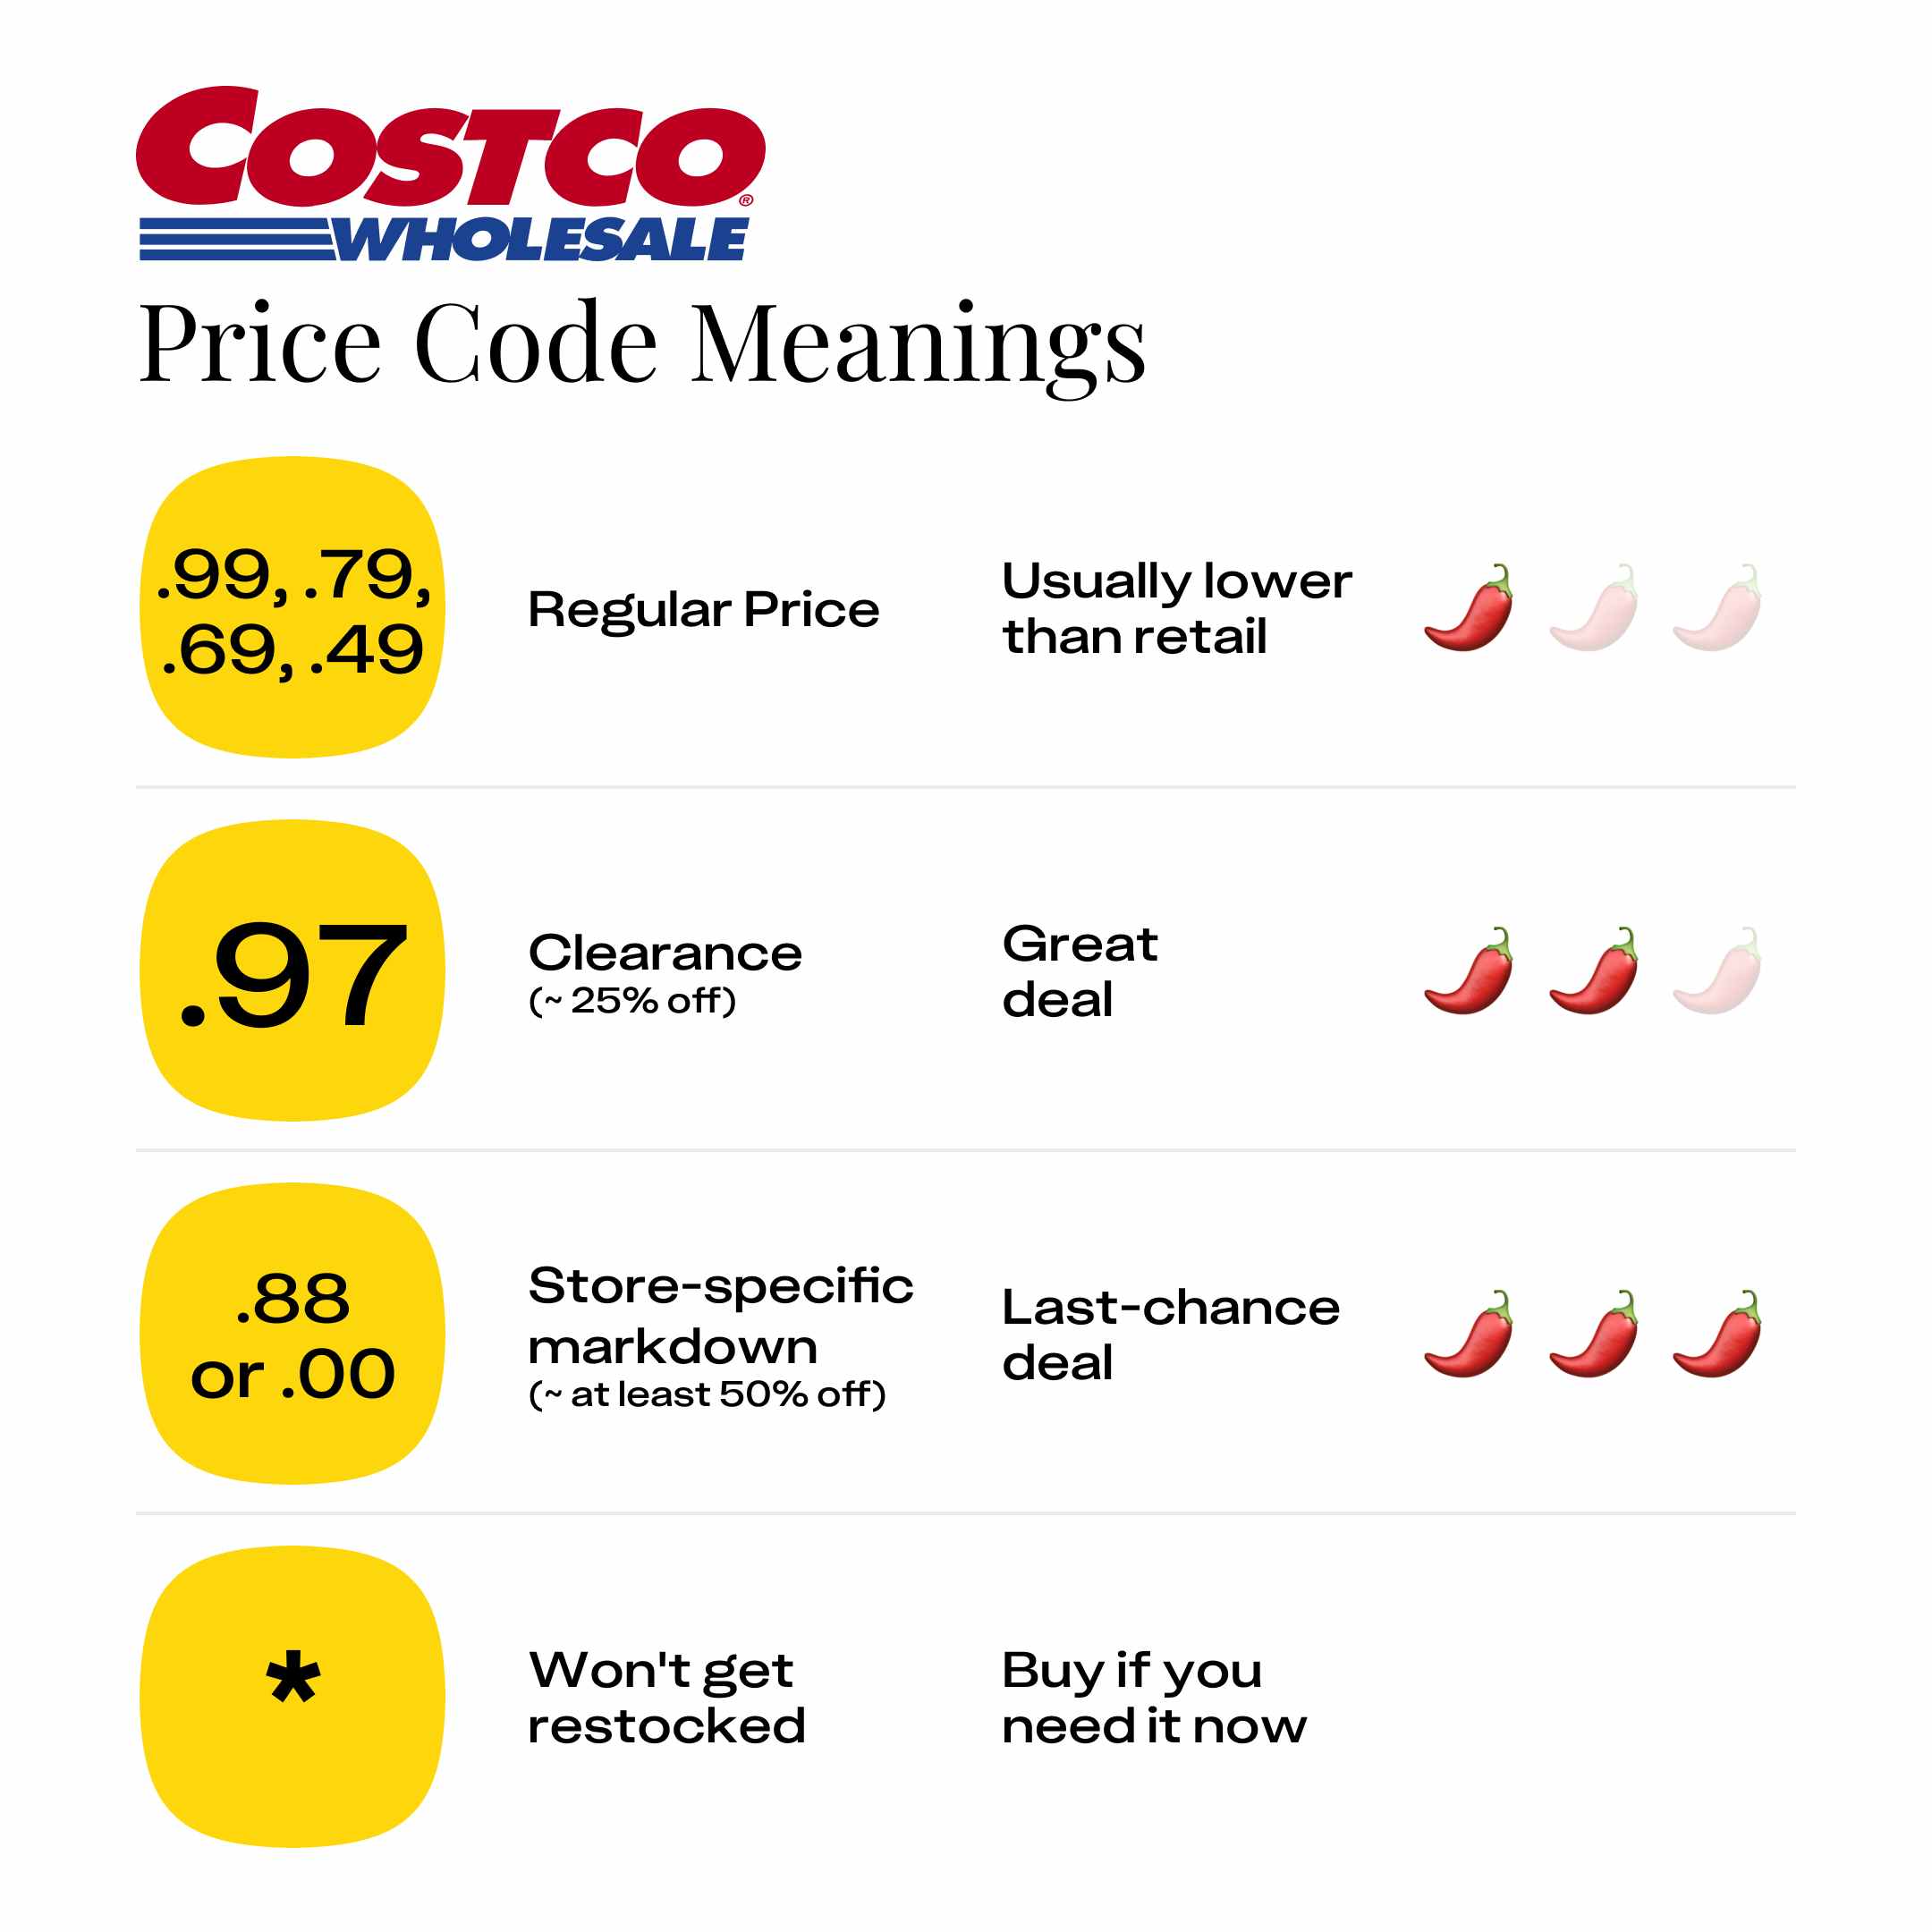 Summary of what Costco price codes on the price tag mean, .97 indicating Costco clearance items and an asterisk, it won't get restocked